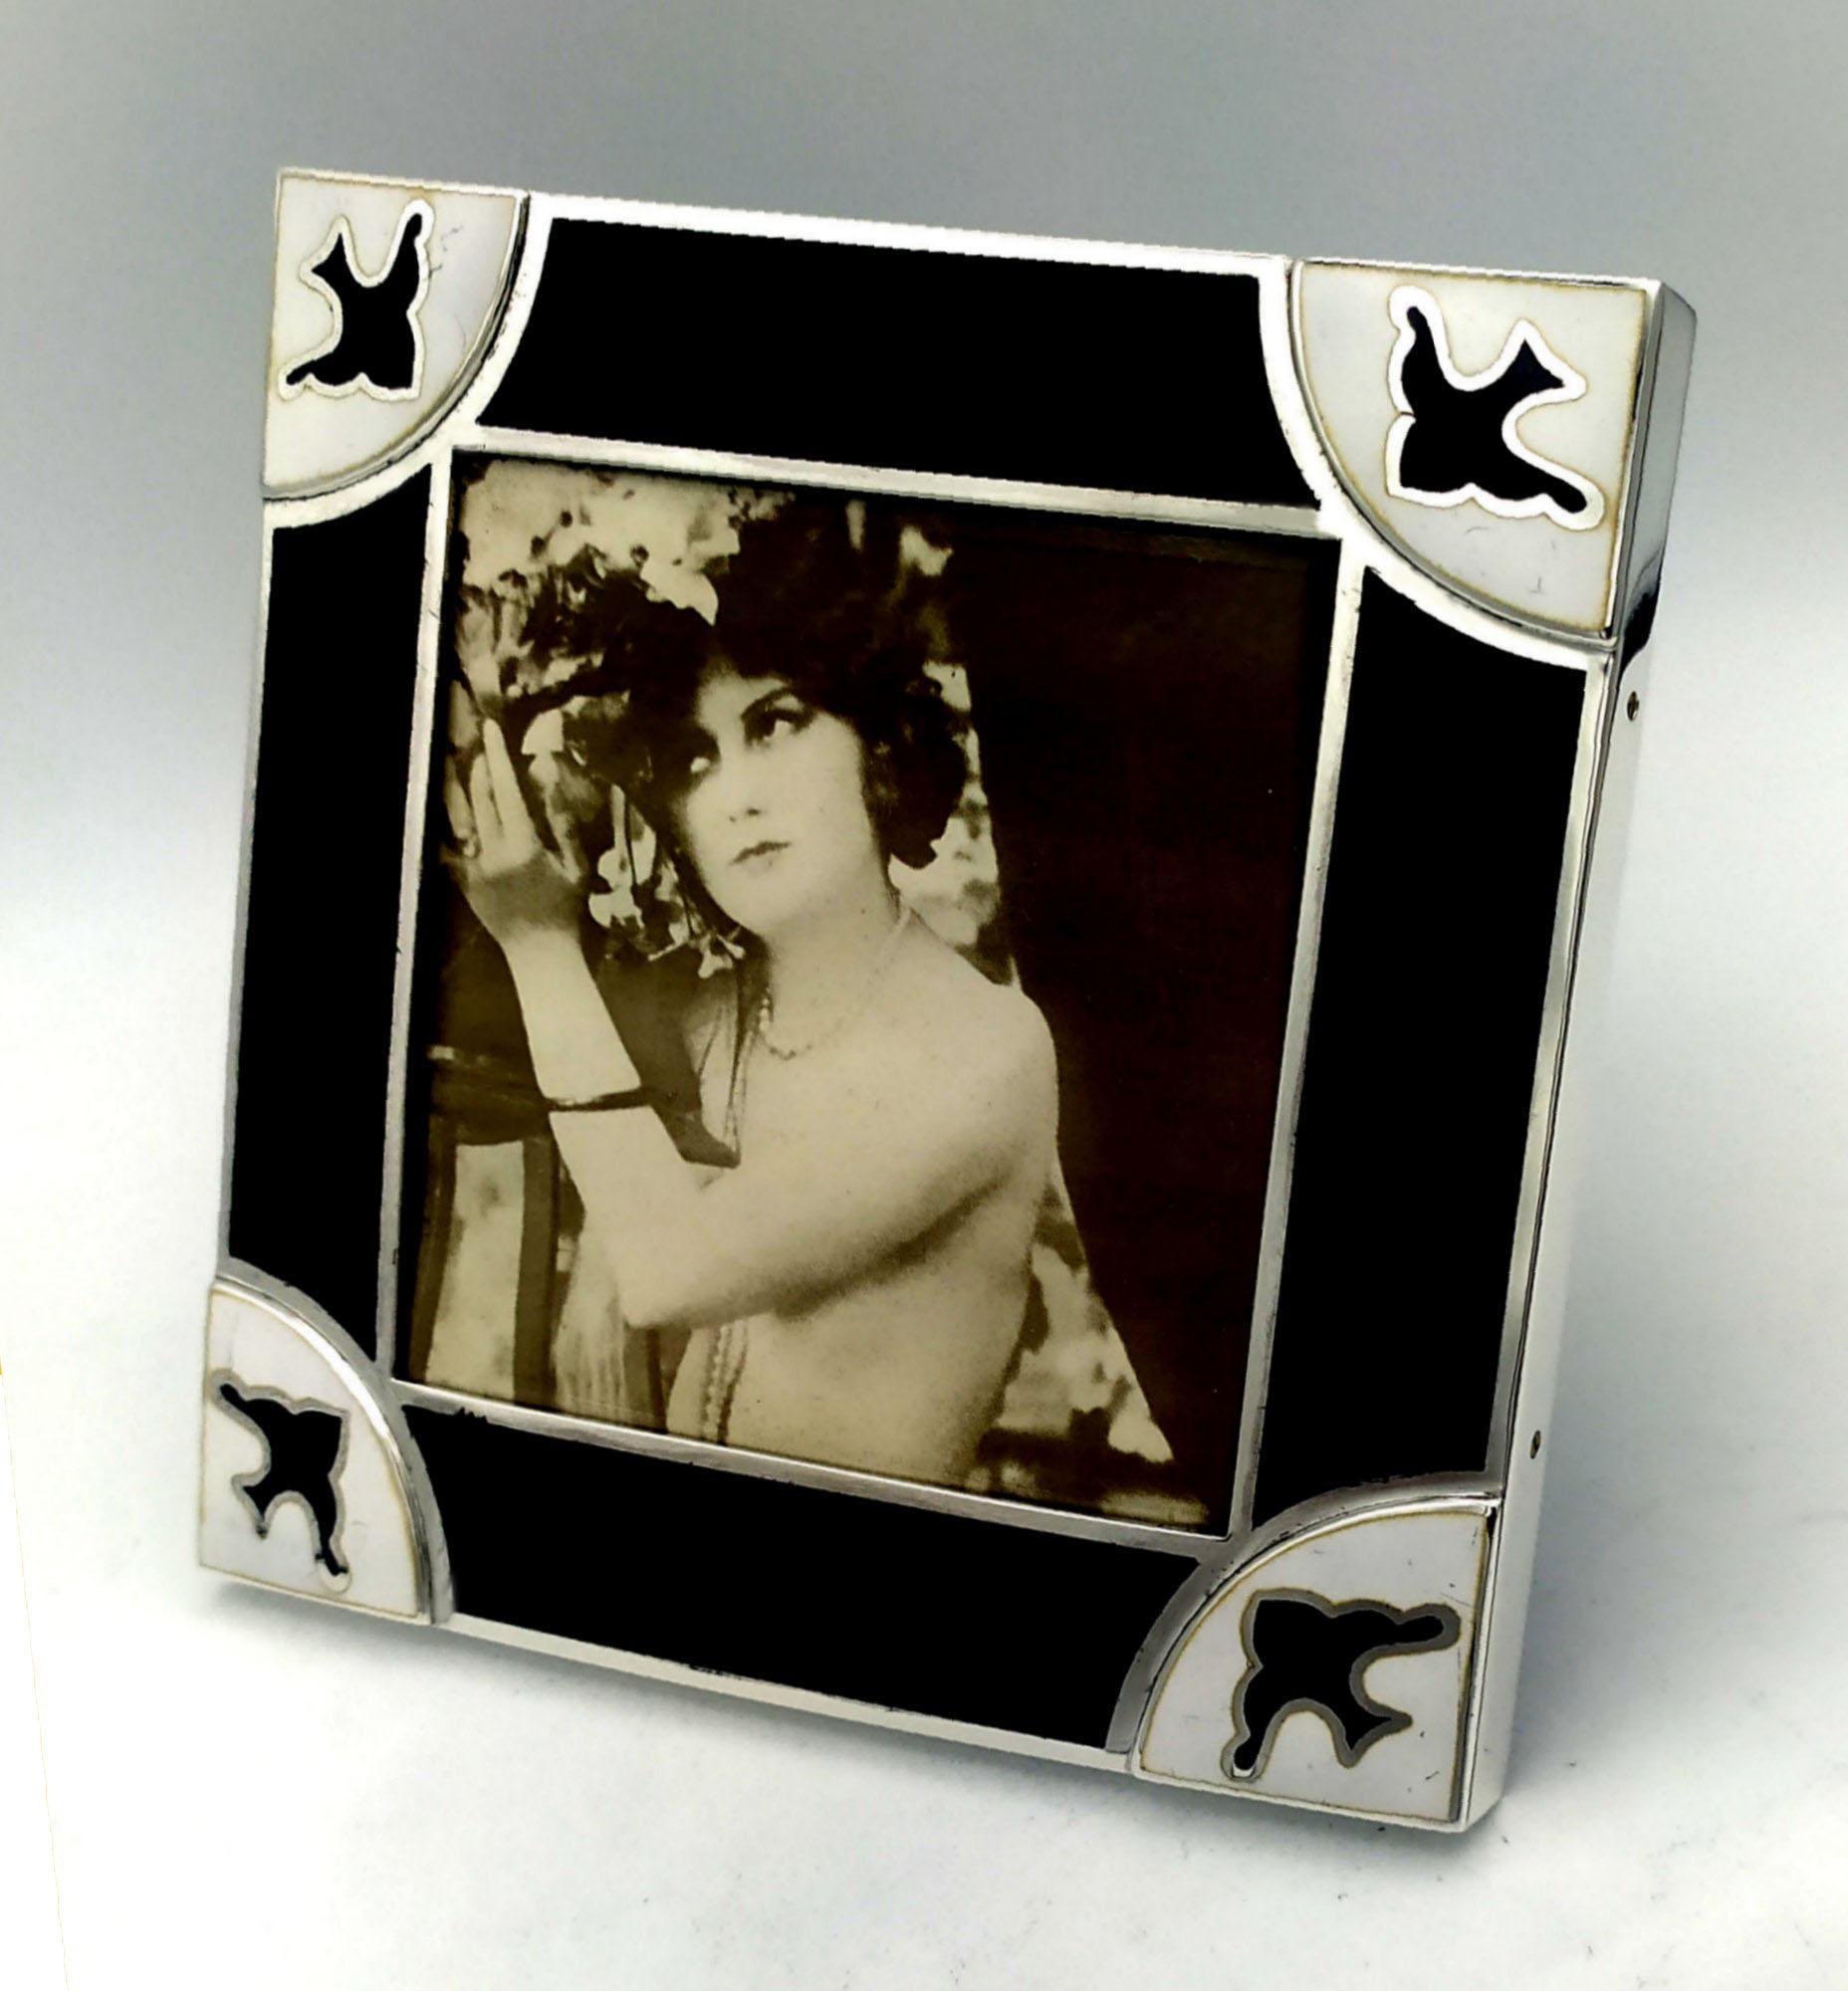 Square photo frame in 925/1000 sterling silver with fire-enamelled Art Deco-style geometric design. External dimensions cm. 14.5 x 14.5 internal cm. 9 x 9. Weight gr. 260. Designed by Giorgio Salimbeni in 1975 on inspiration from drawings and models